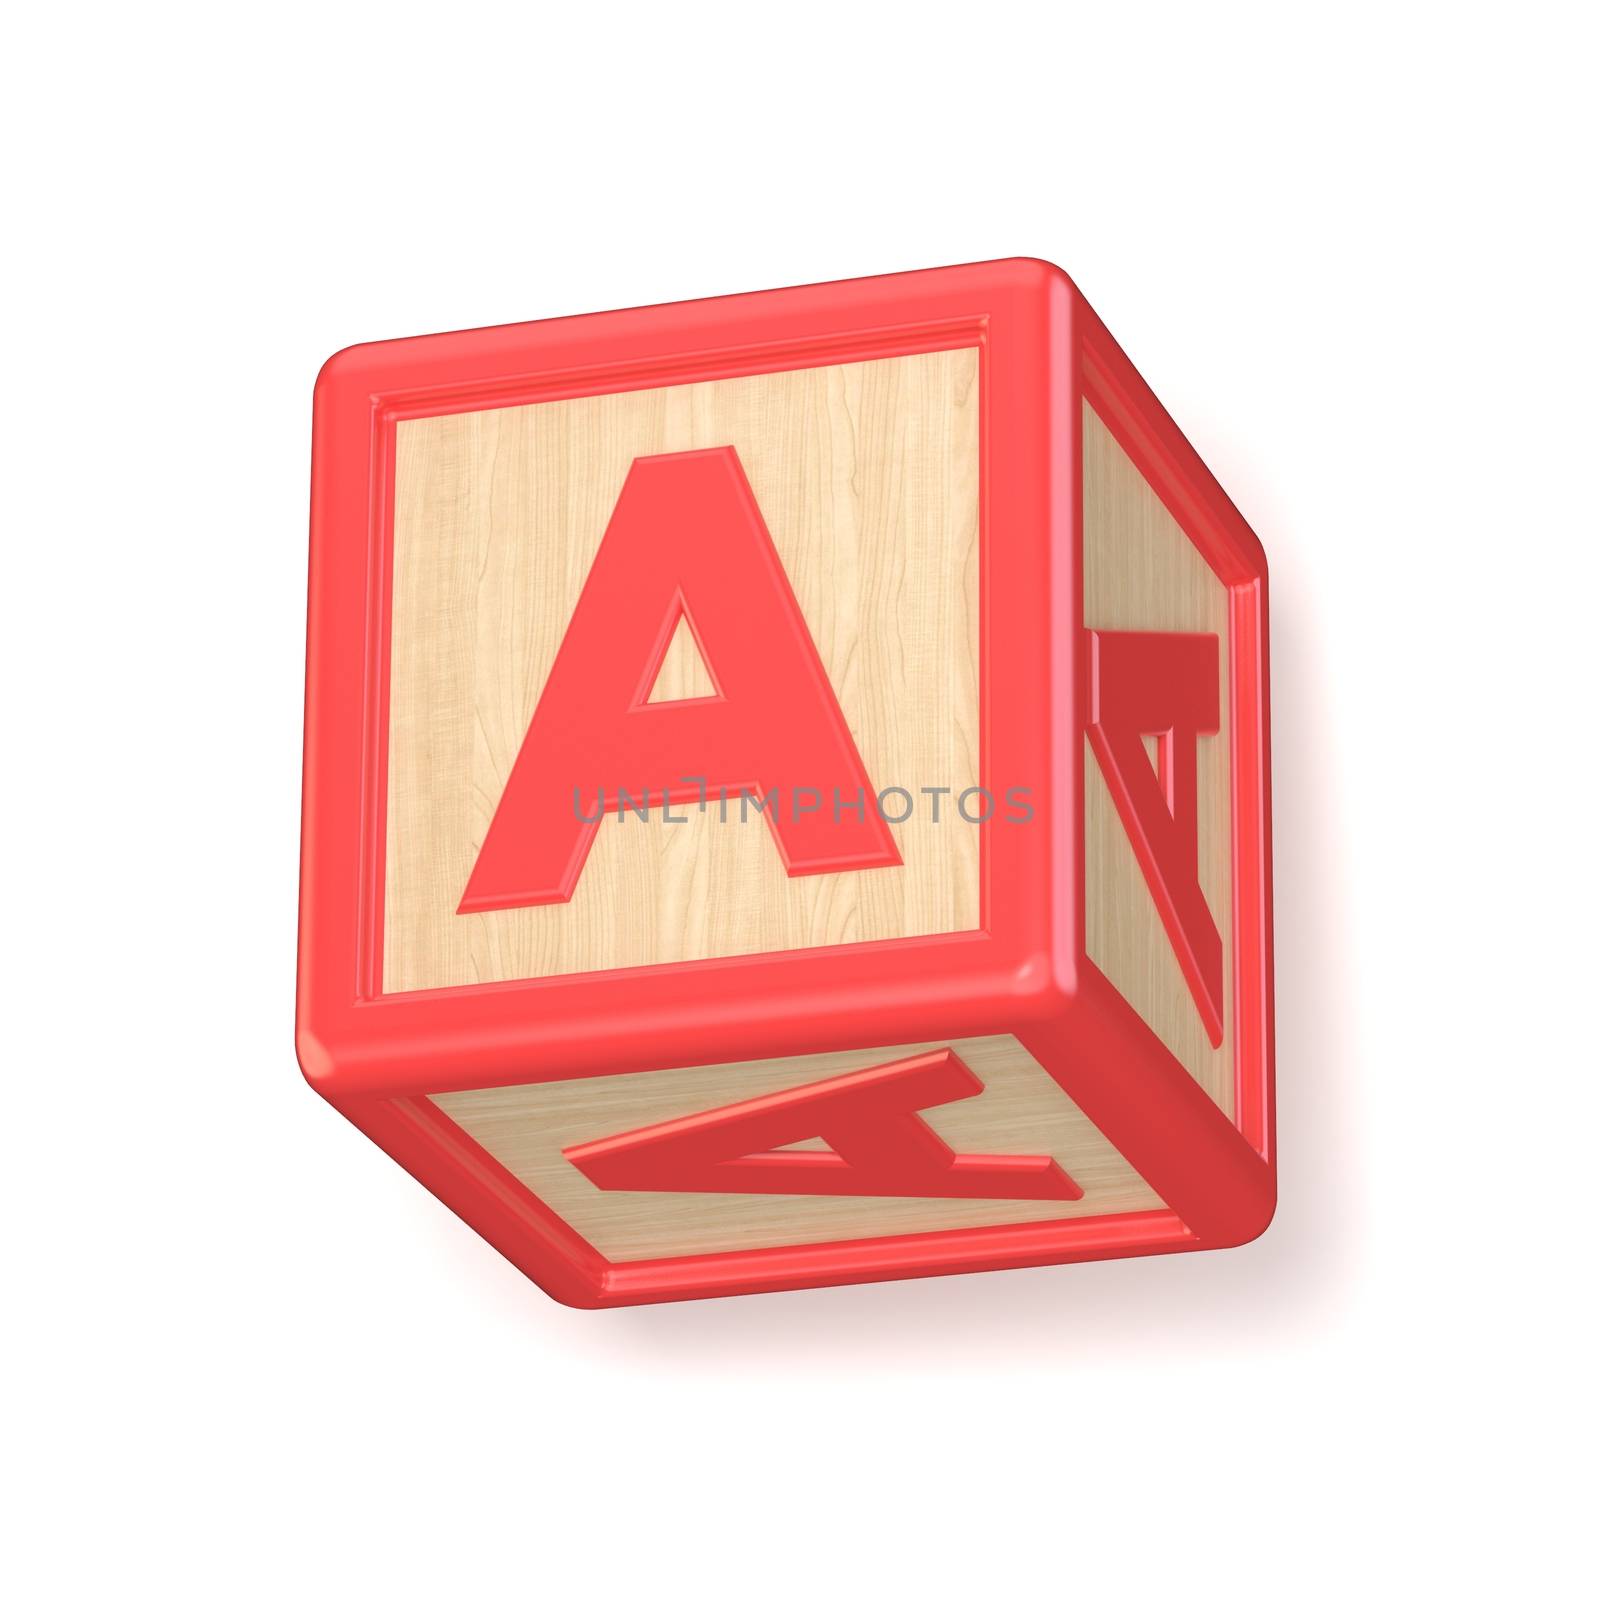 Letter A wooden alphabet blocks font rotated. 3D render illustration isolated on white background